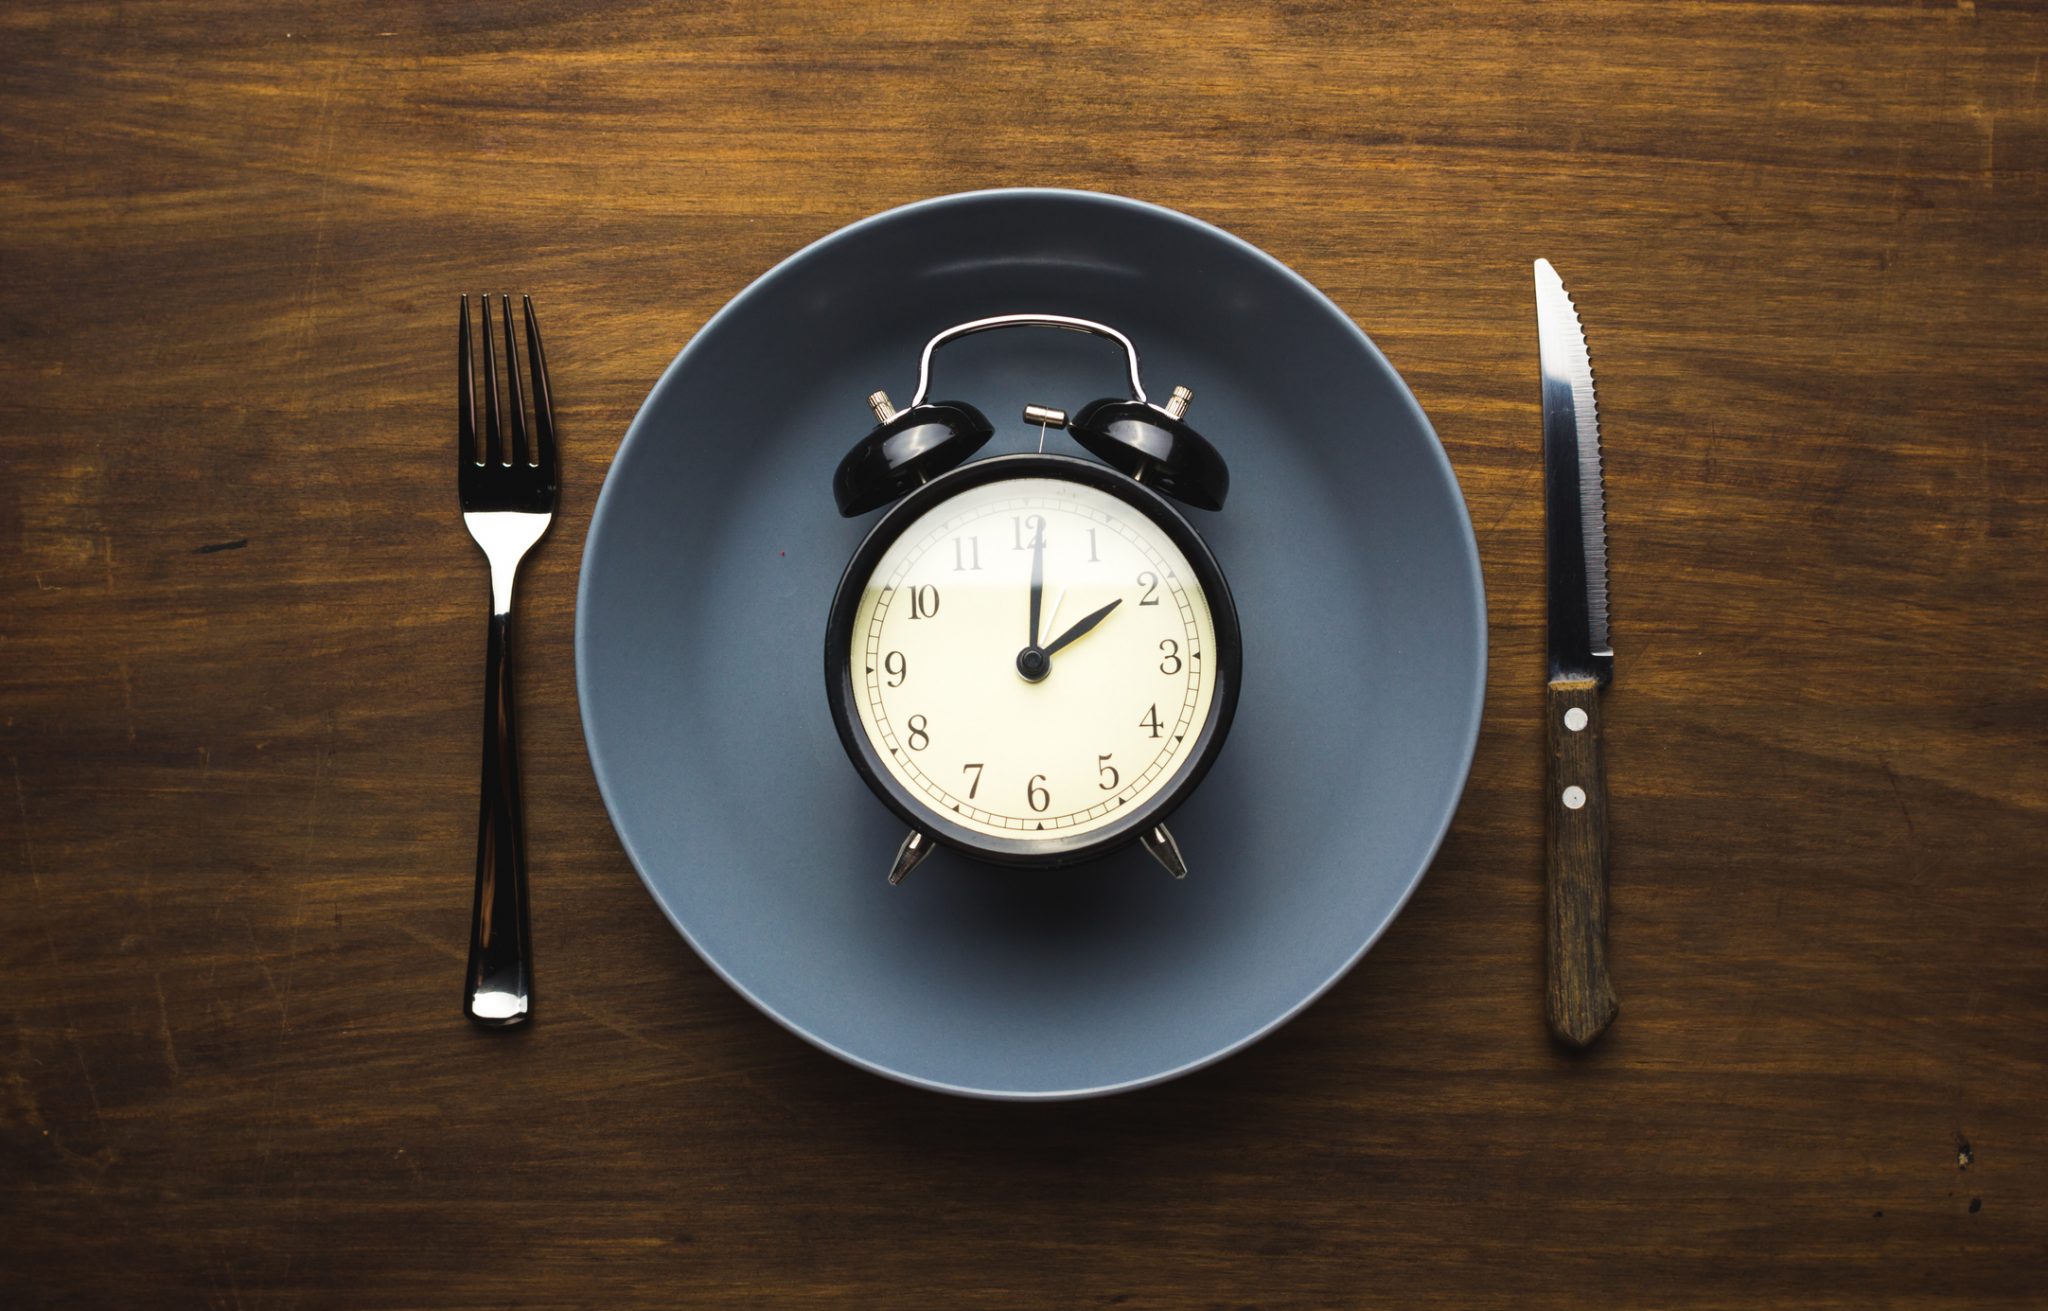 Fasting can help reduce insulin resistance